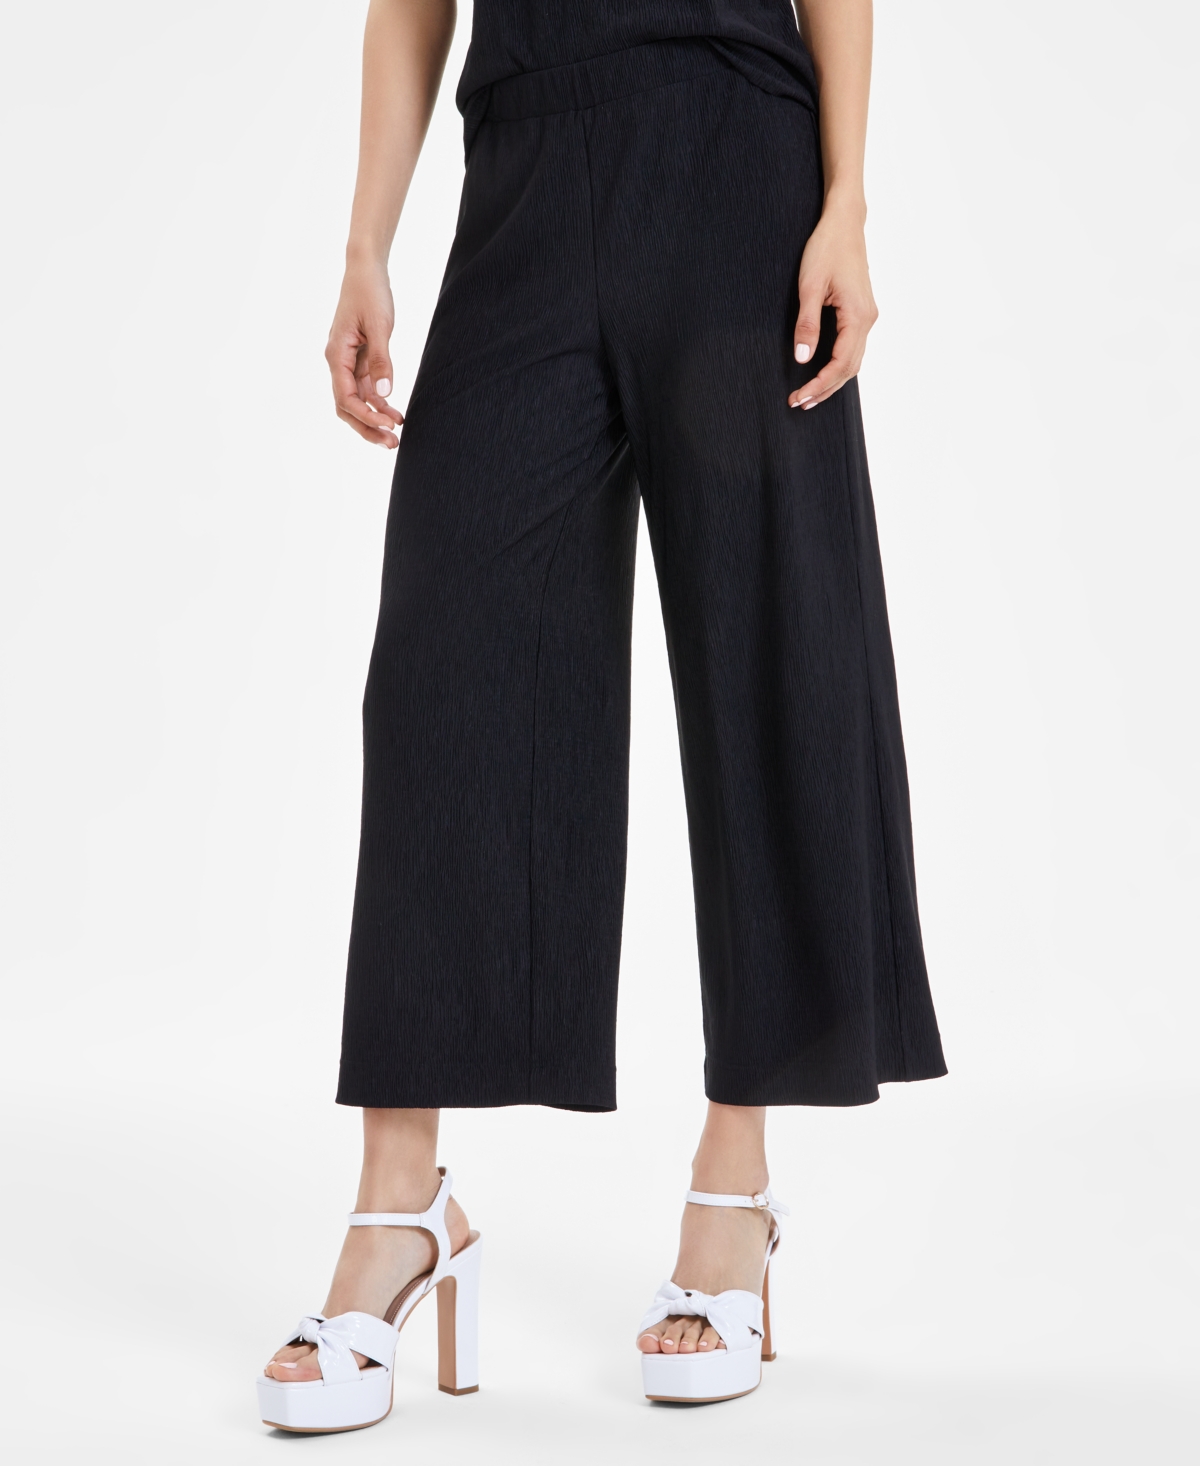 Women's Wide-Leg Cropped Pull-On Pants, Created for Macy's - Black